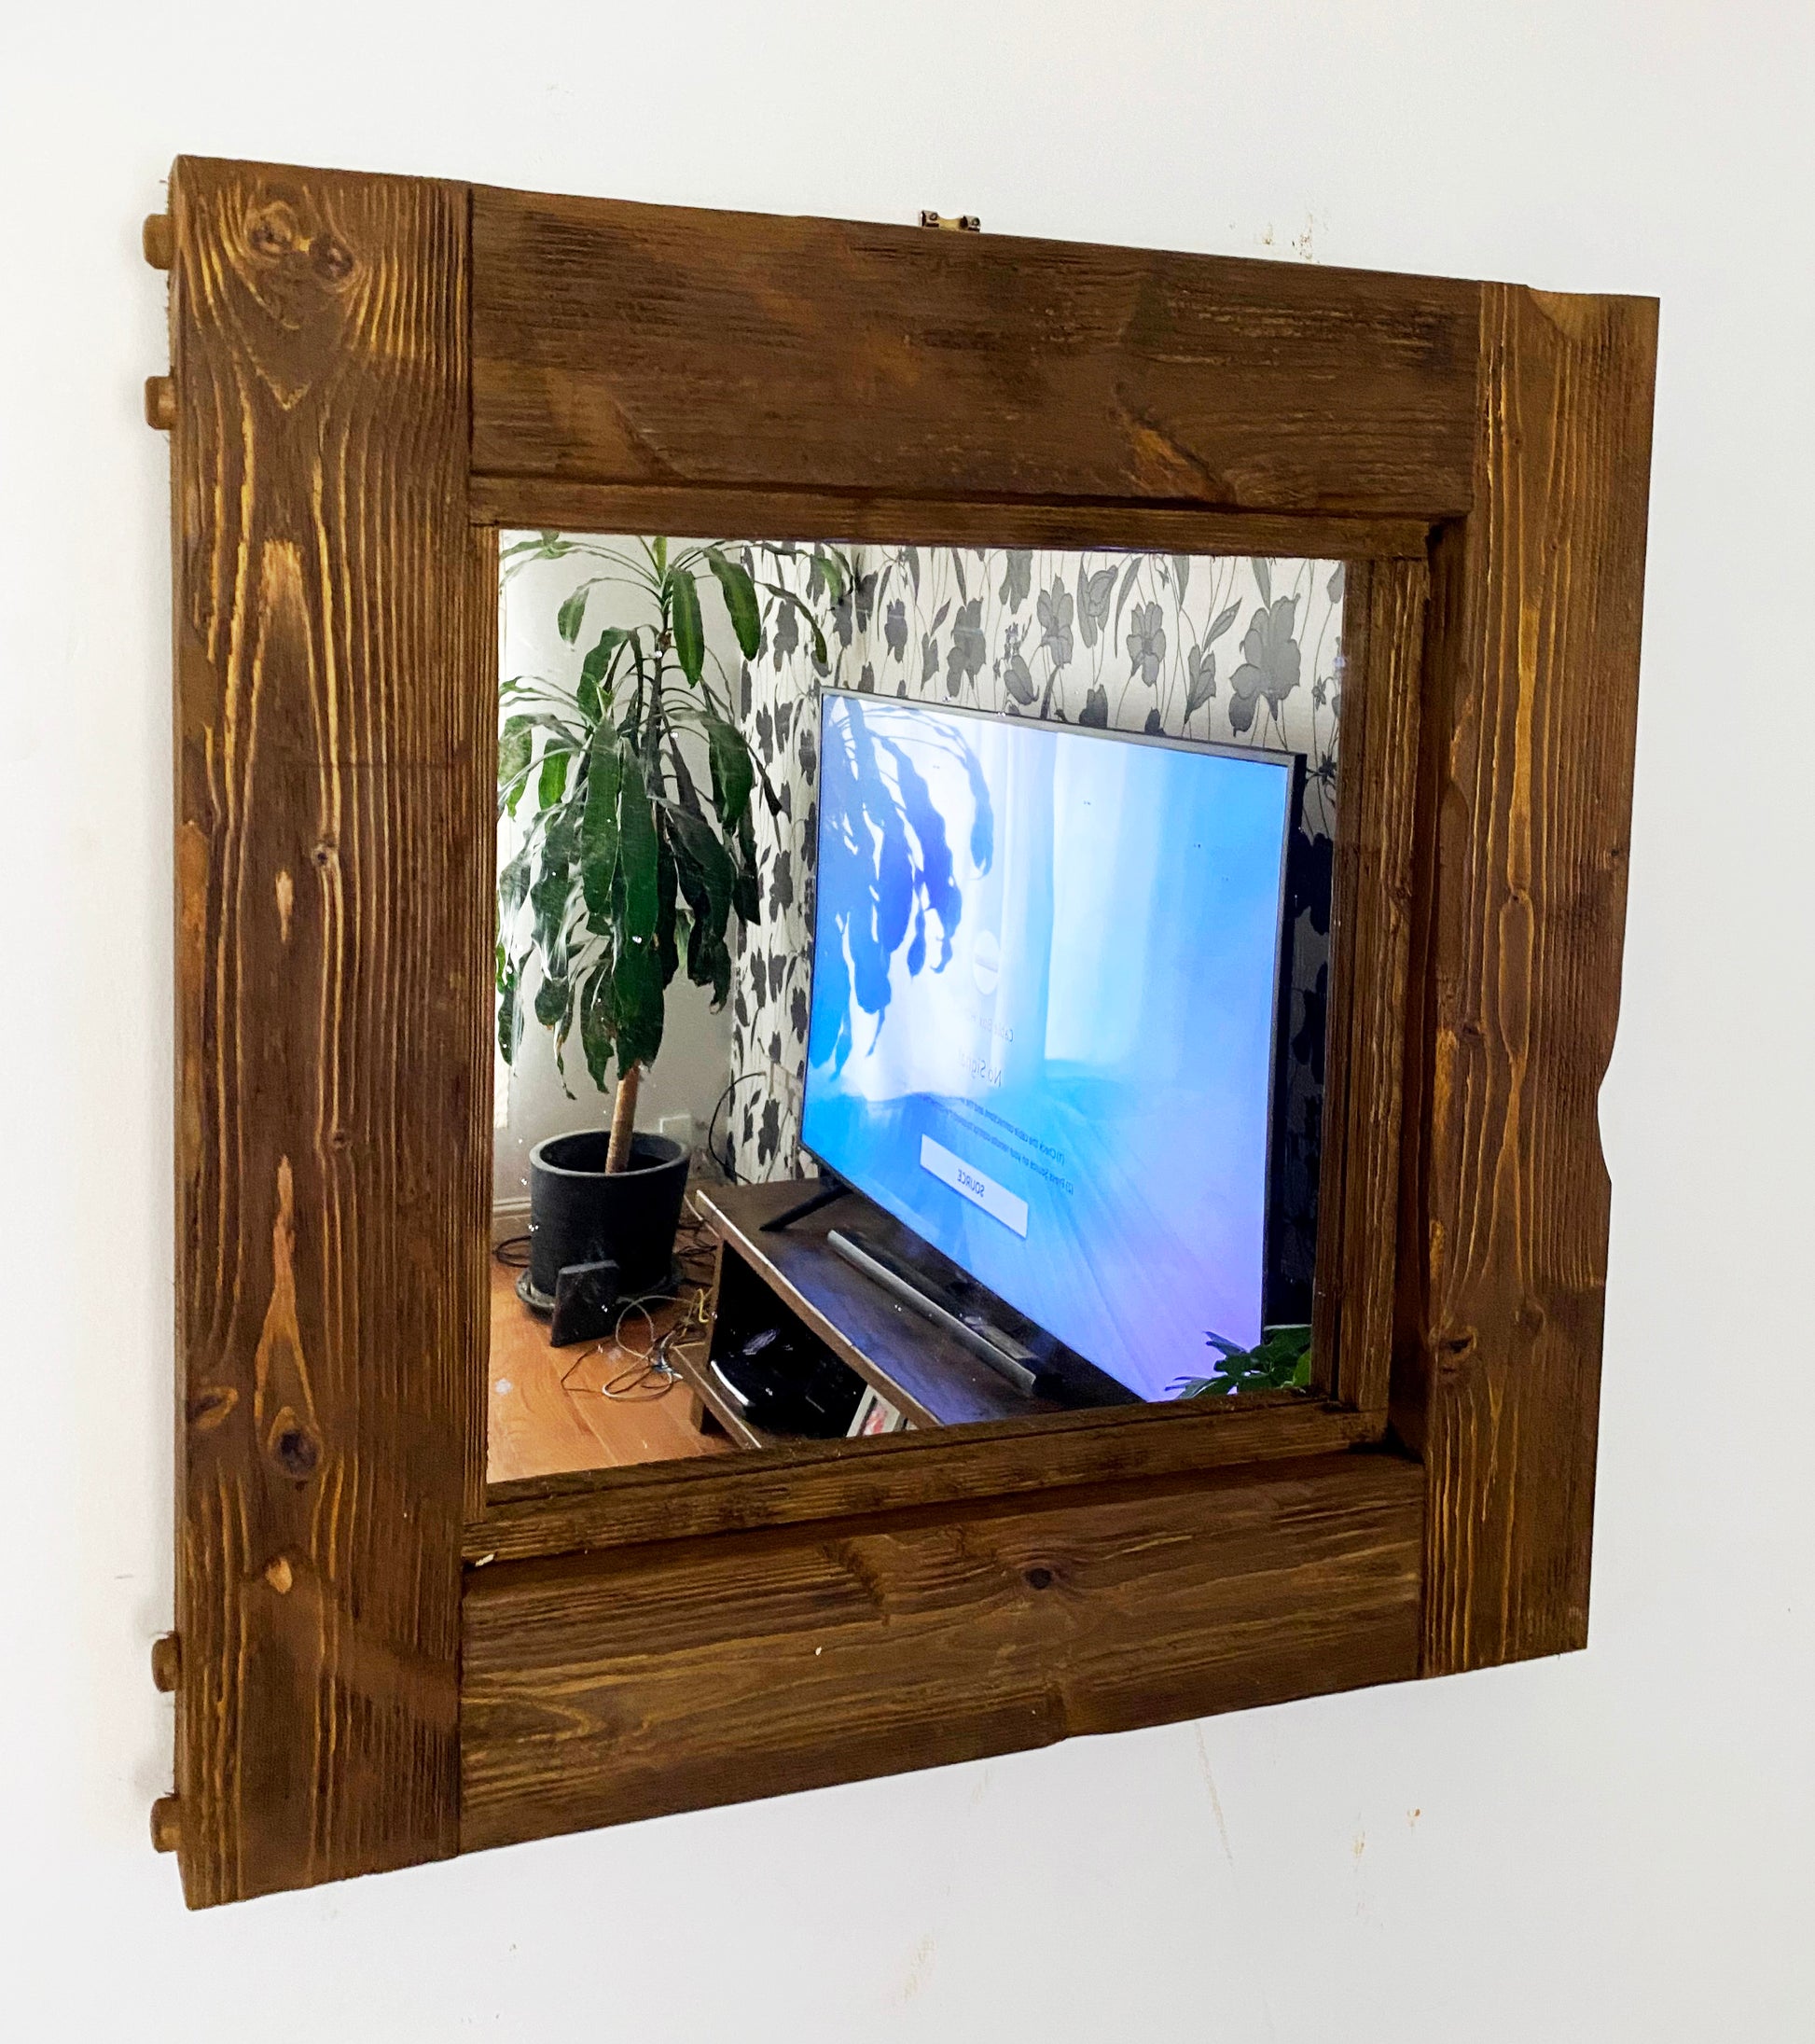 Chunky wooden mirror made from distressed timber and aged perfectly